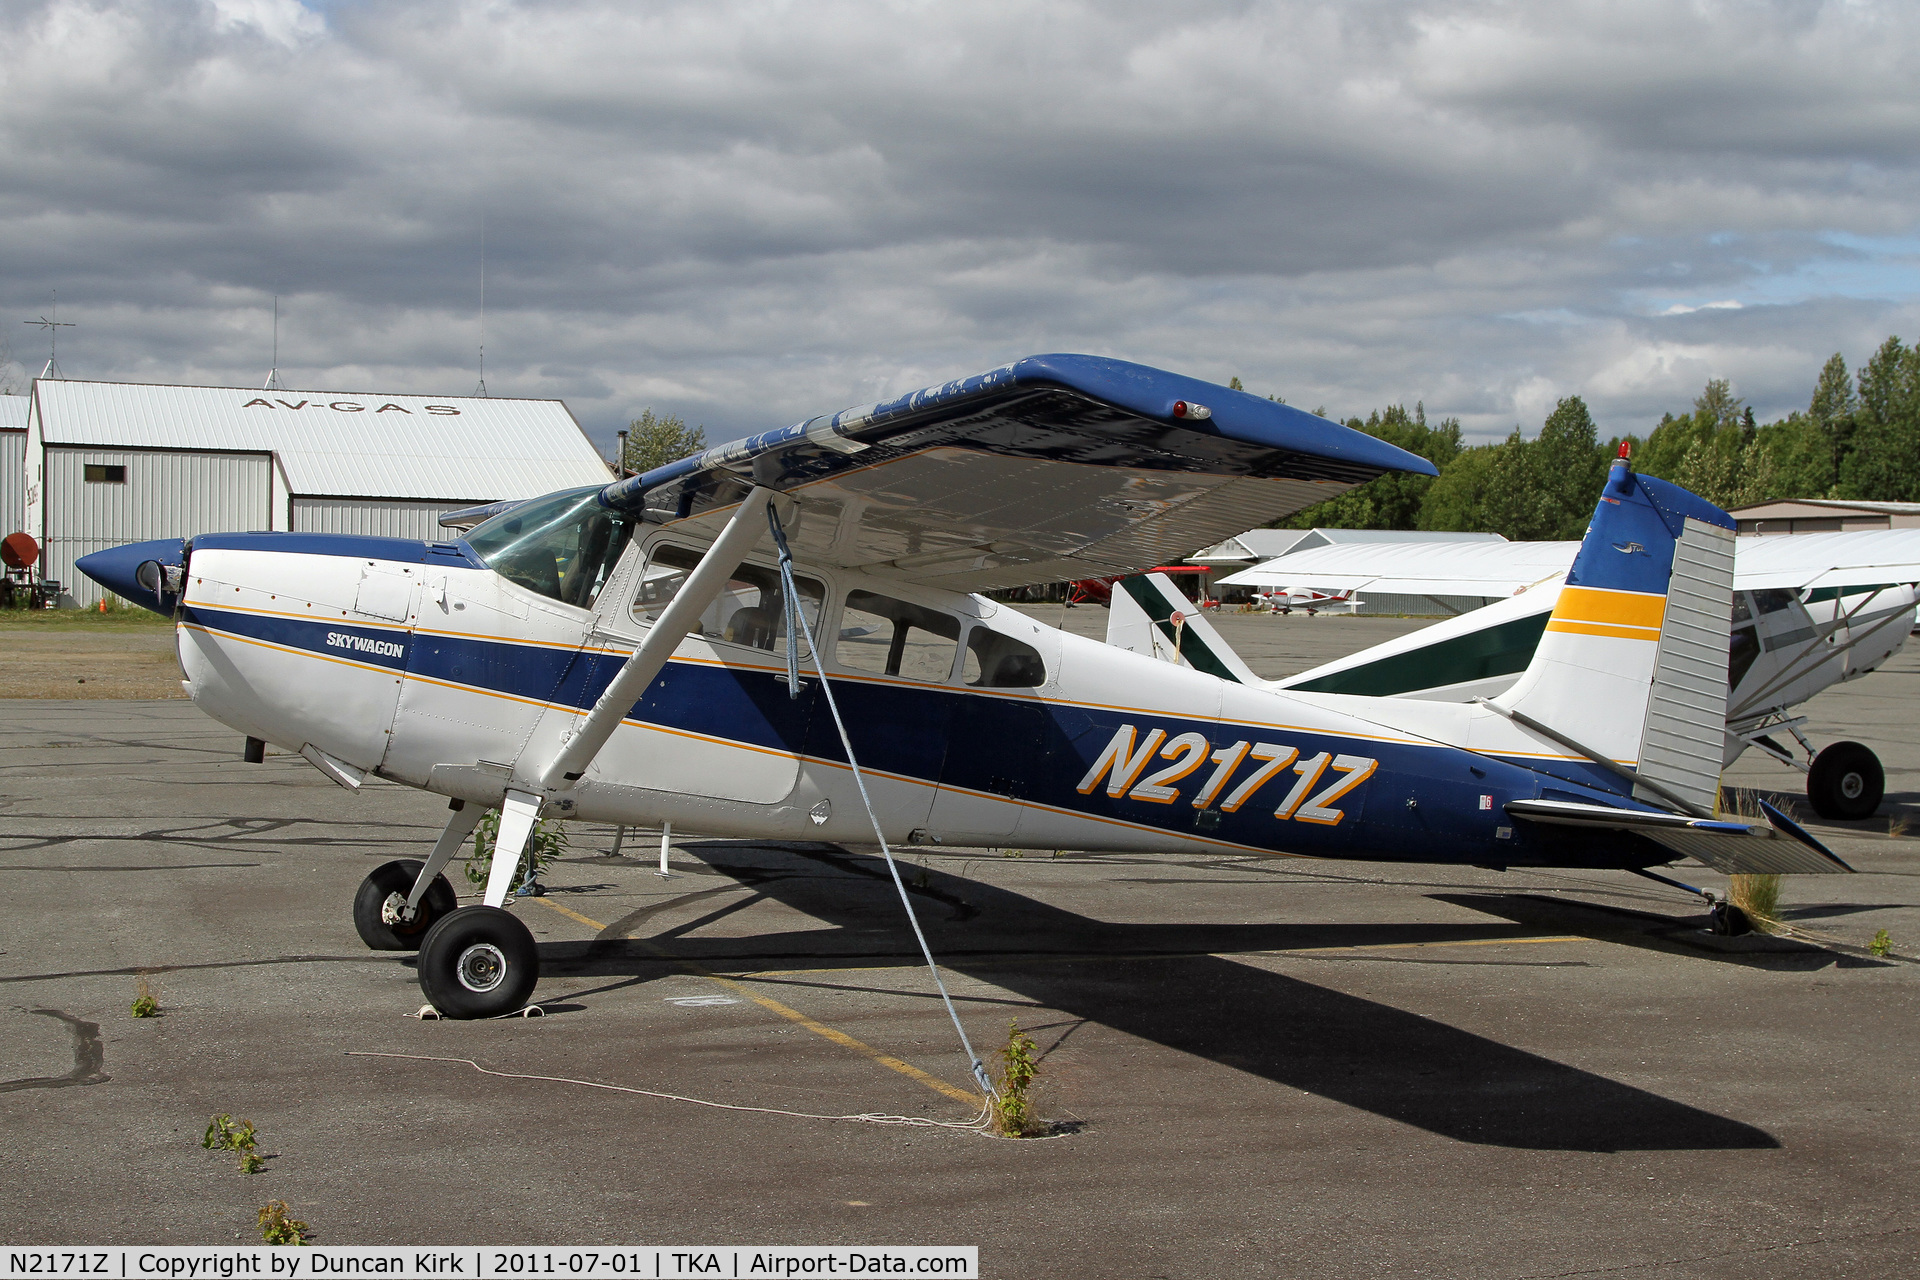 N2171Z, 1970 Cessna 180H Skywagon C/N 18052136, Talkeetna has a good variety of aircraft present and is quite busy